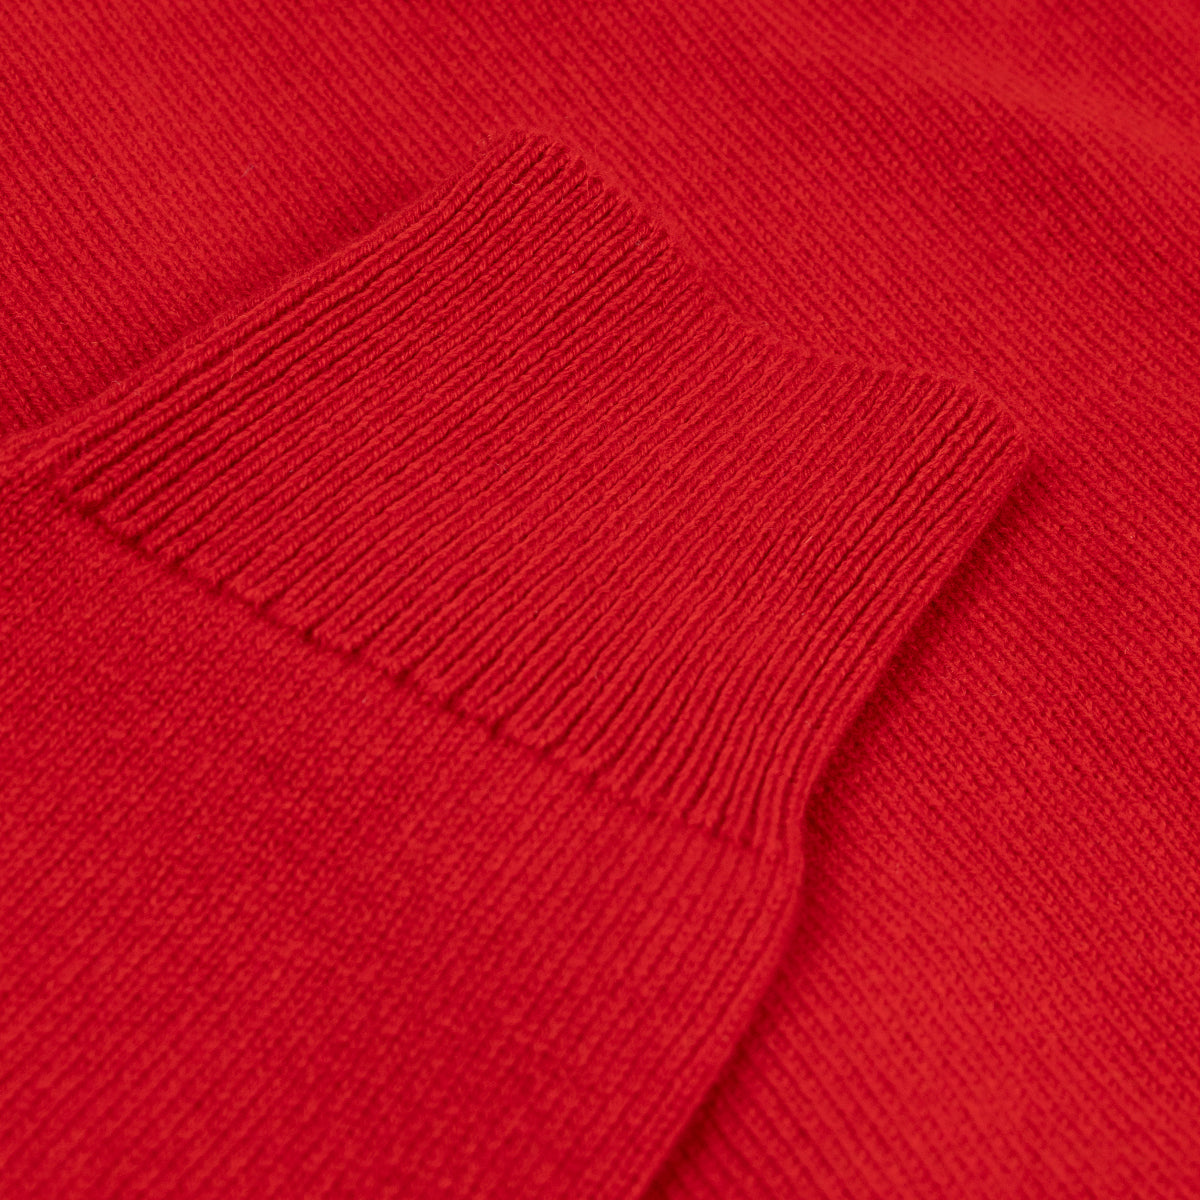 Ruby Red Mallaig 4ply Cashmere Cardigan  Robert Old   